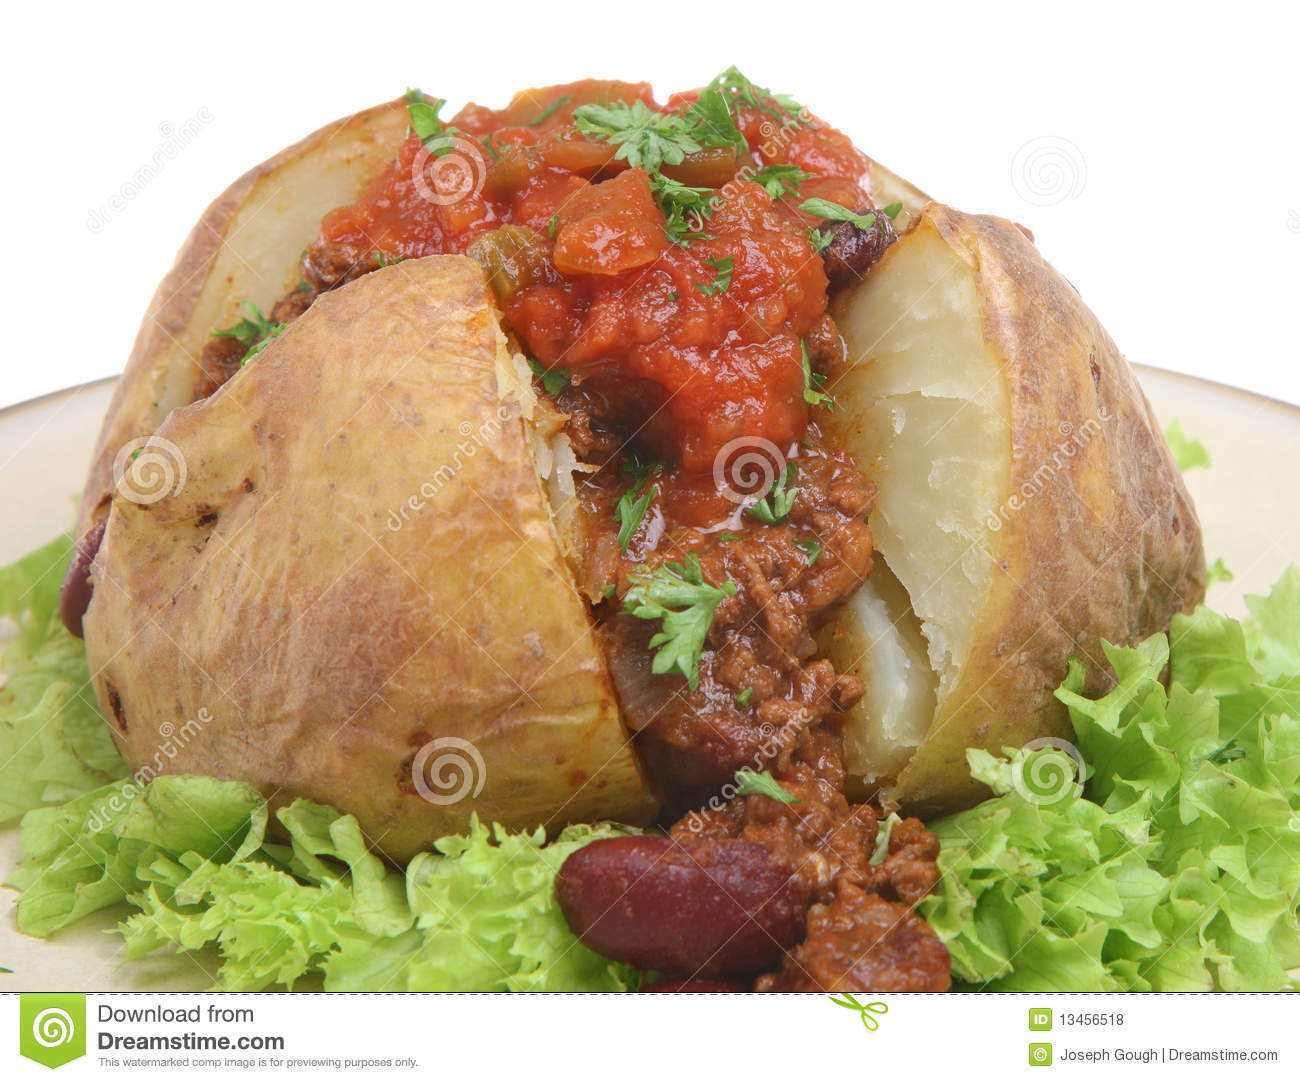 Jacket Potato Filled With Chilli Con Carne And Tomato Salsa 